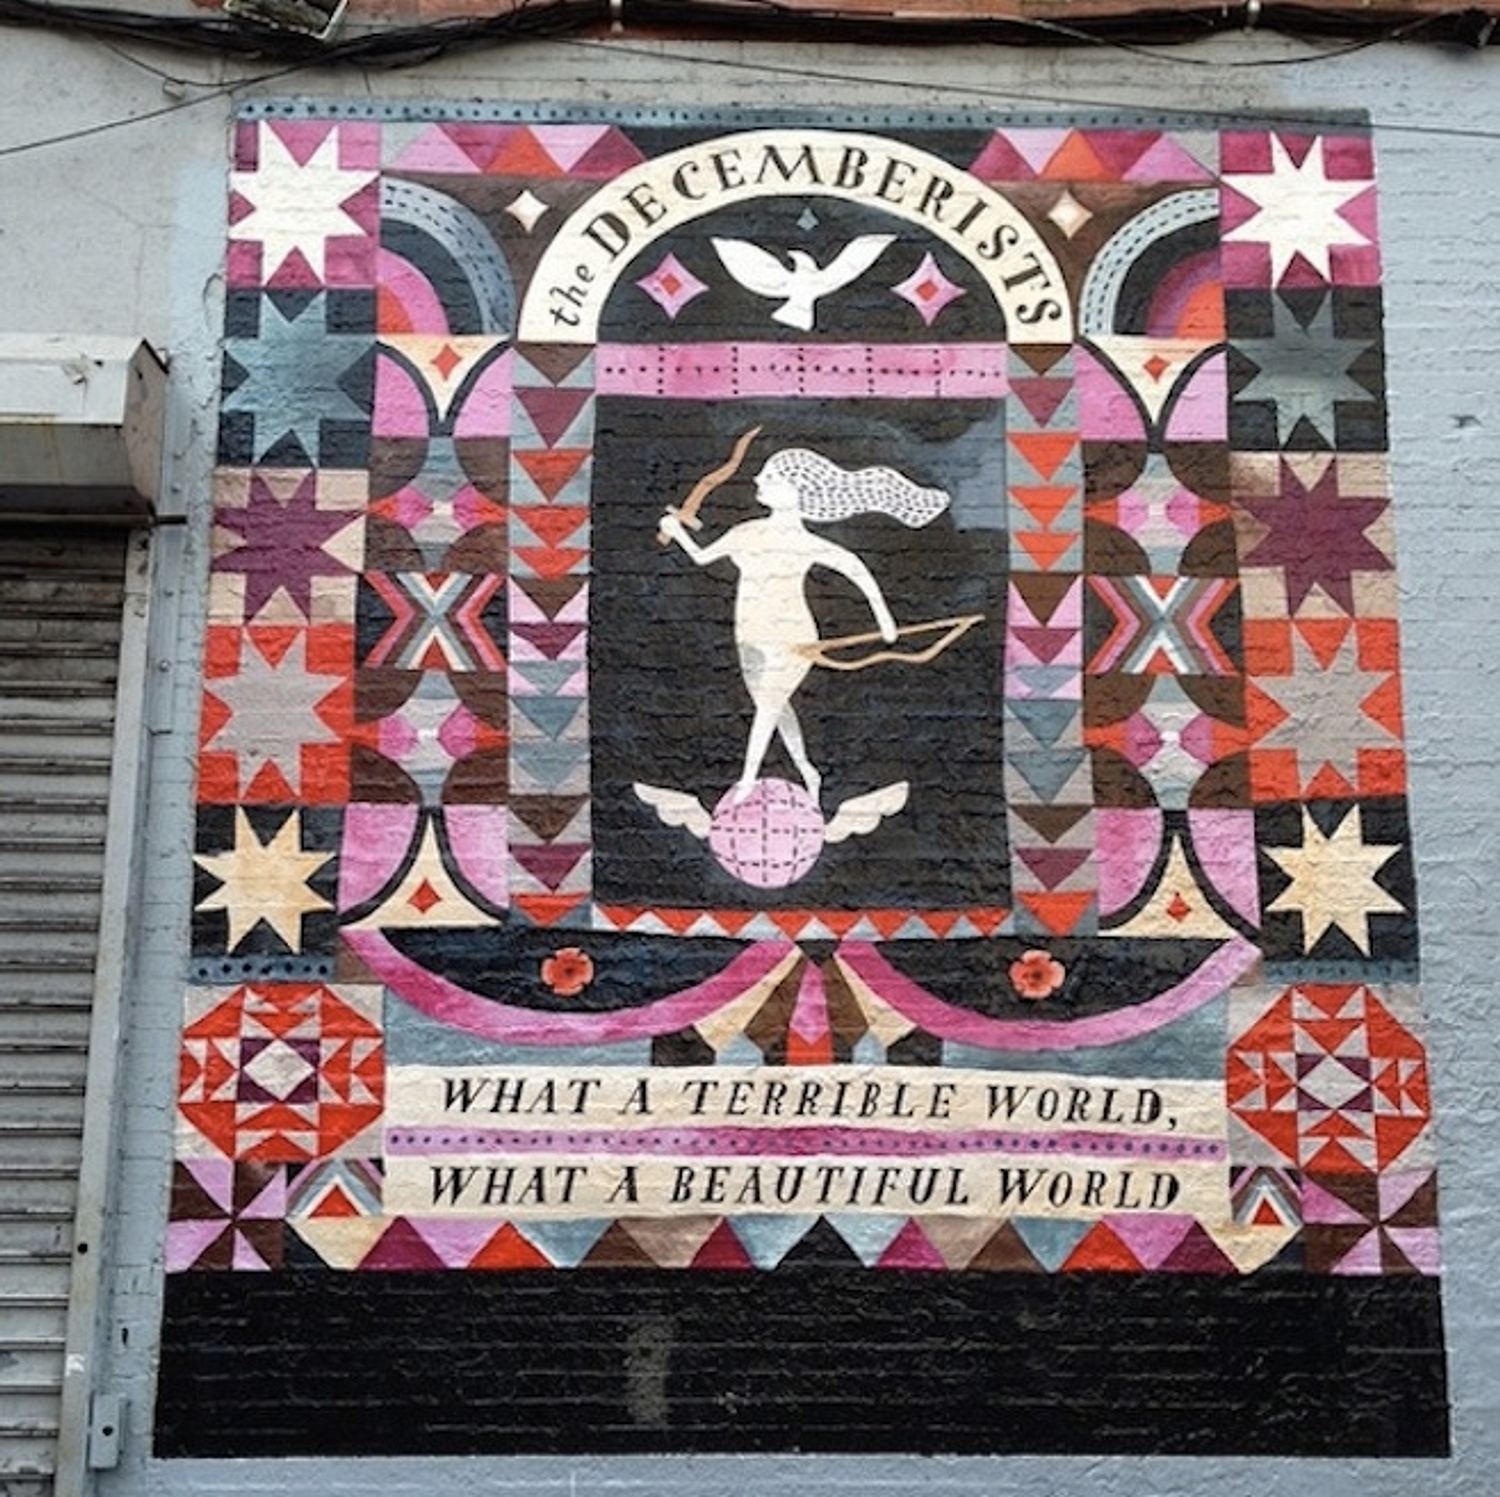 The Decemberists confirm new album by performing in a Brooklyn street